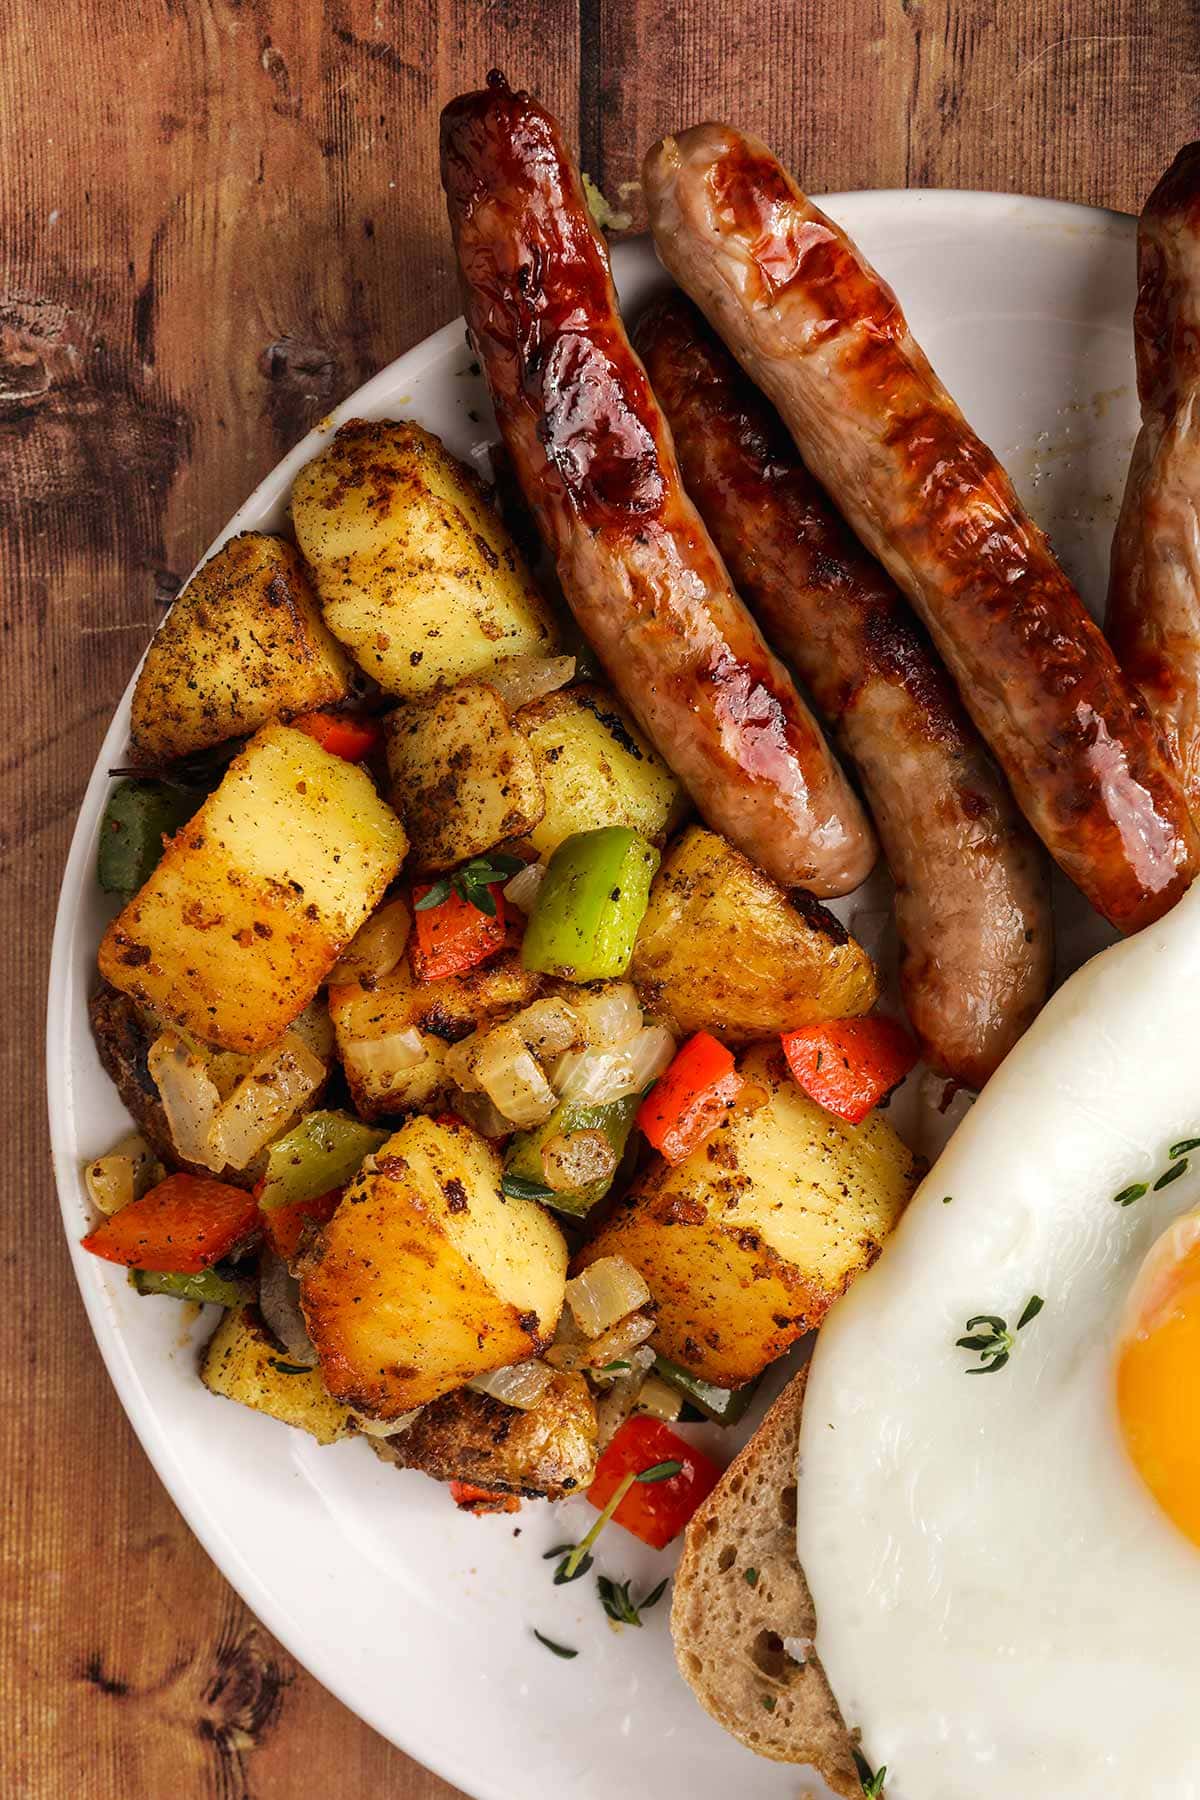 Home Fried Potatoes on serving plate with egg and sausage